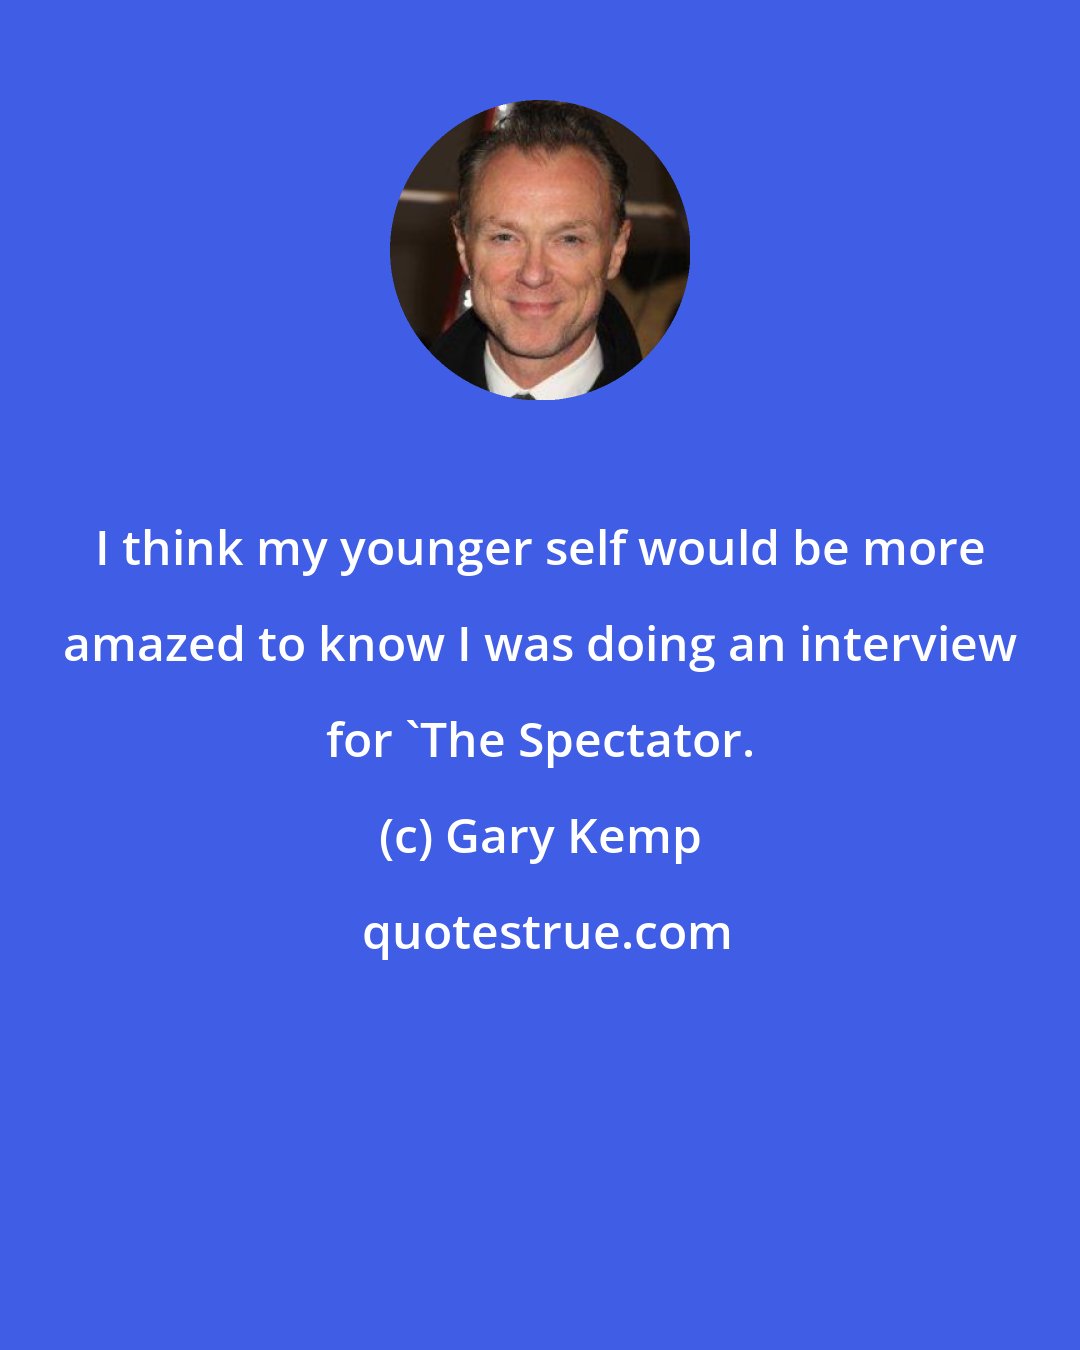 Gary Kemp: I think my younger self would be more amazed to know I was doing an interview for 'The Spectator.